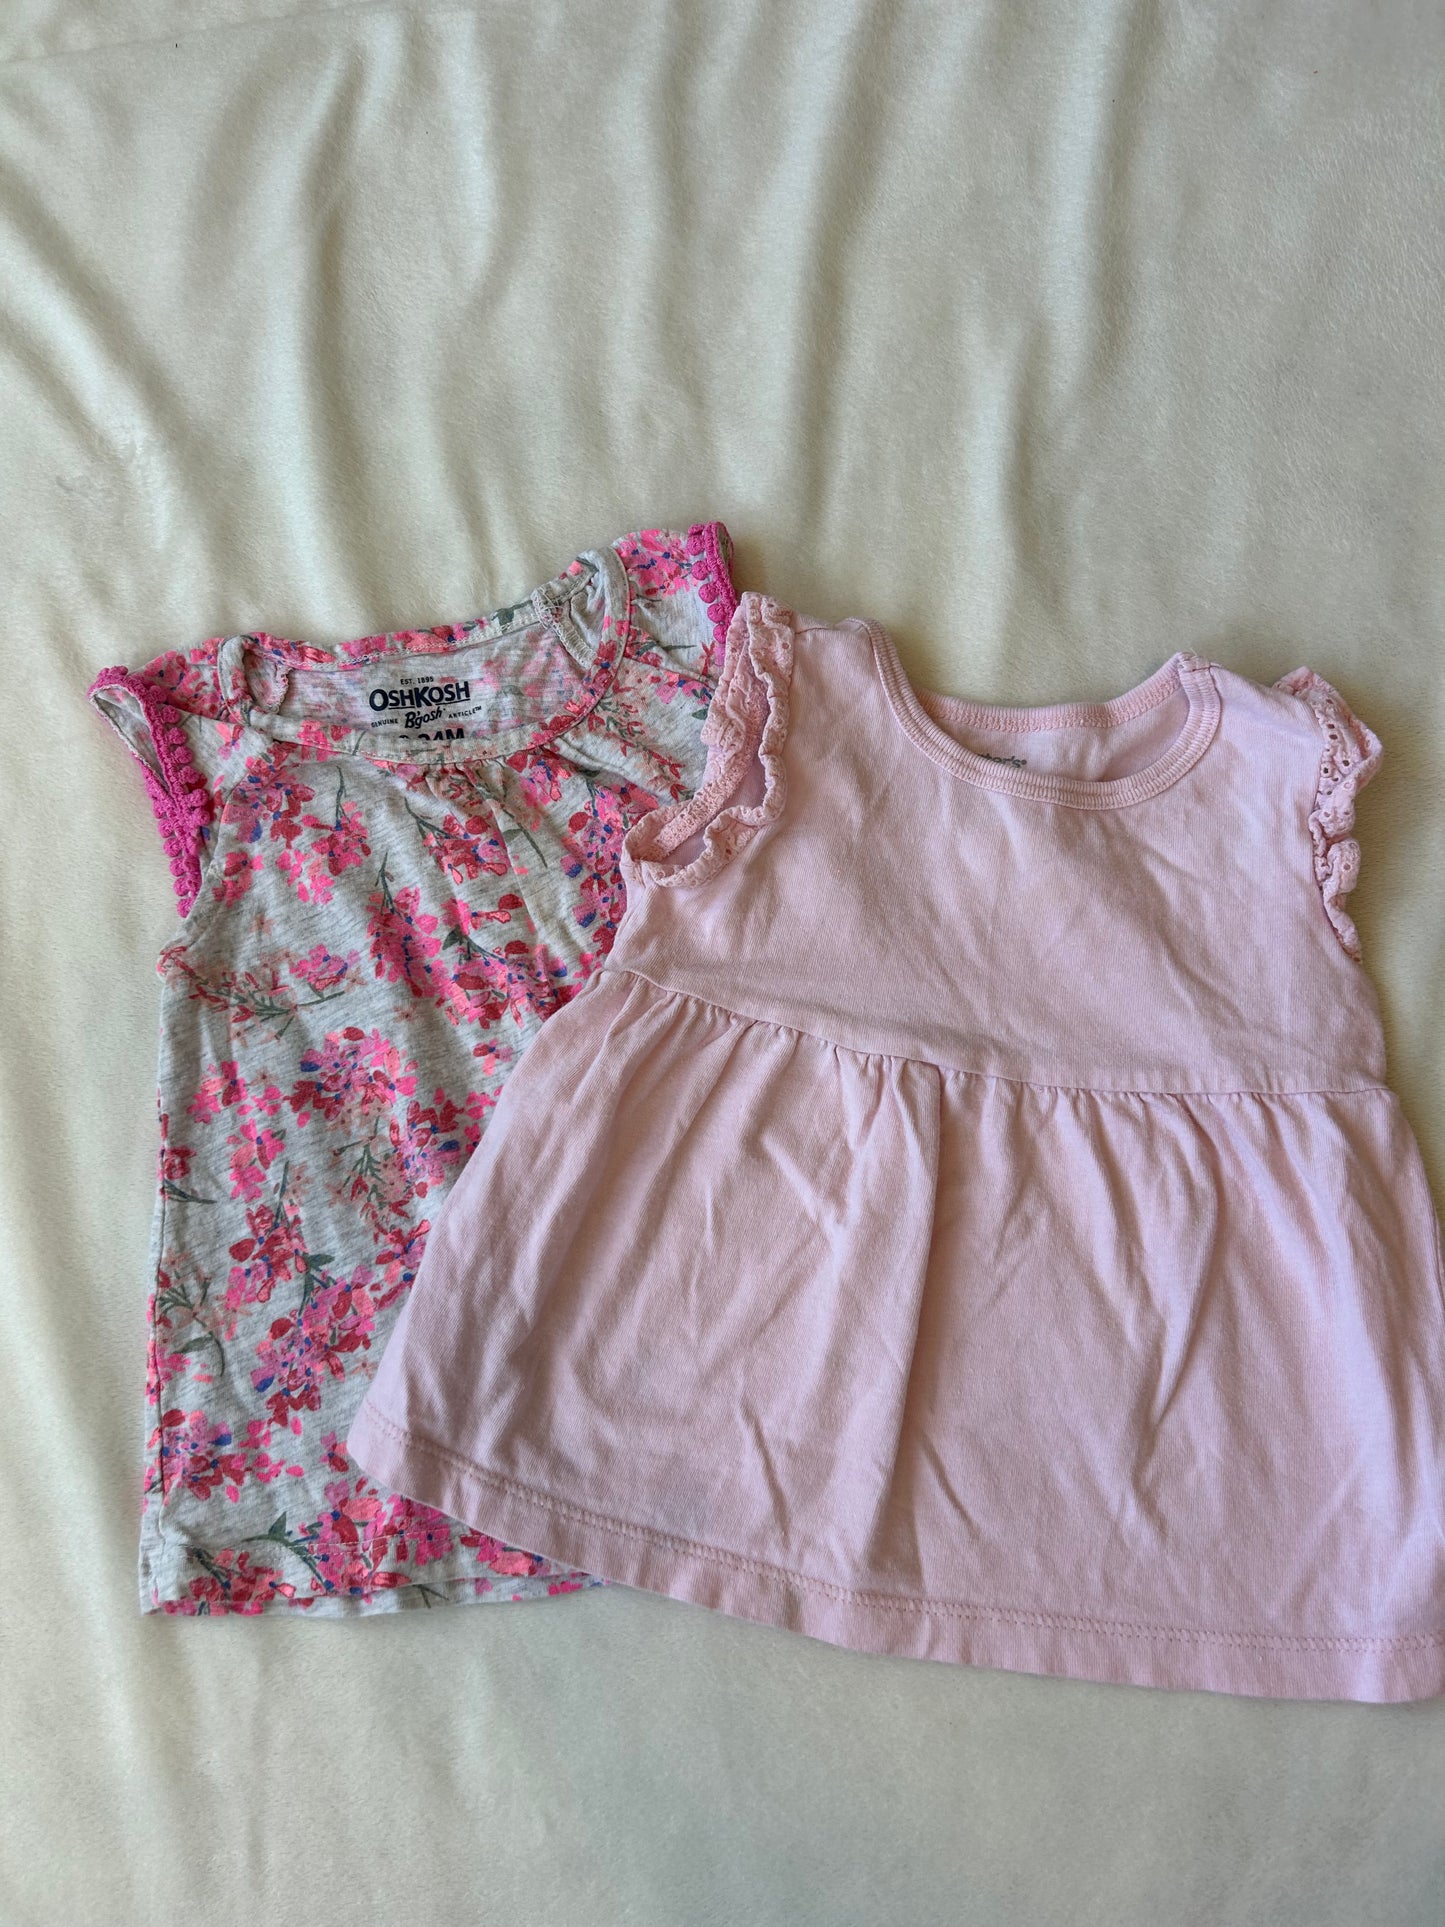 Carter's Girls 18-24 Month Summer Tank Bundle (Pink w/ ruffle/Gray with Pink Flowers)